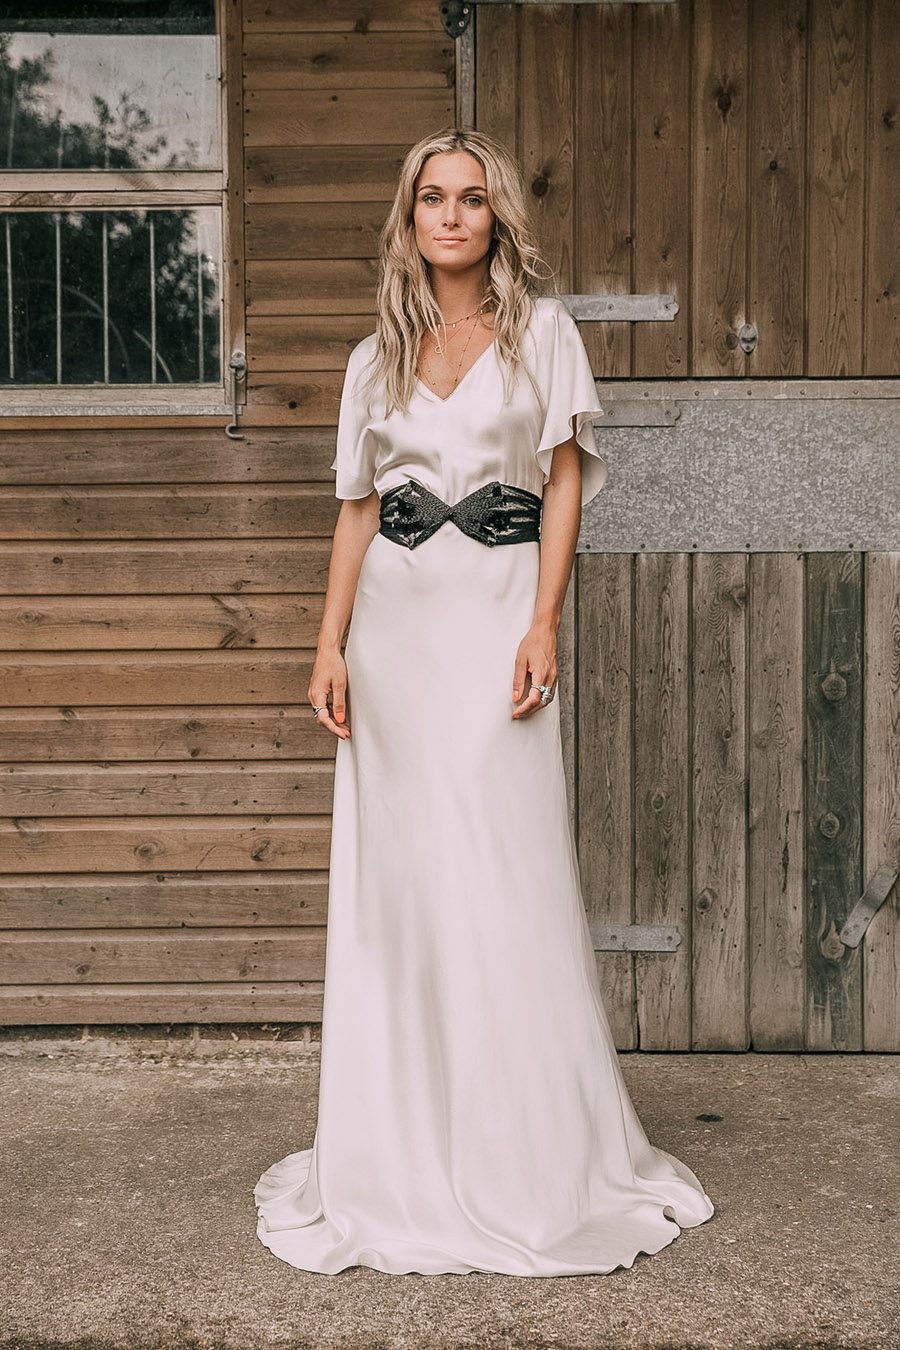 Belle and Bunty cowgirl wedding dress collection 2019 London (6)